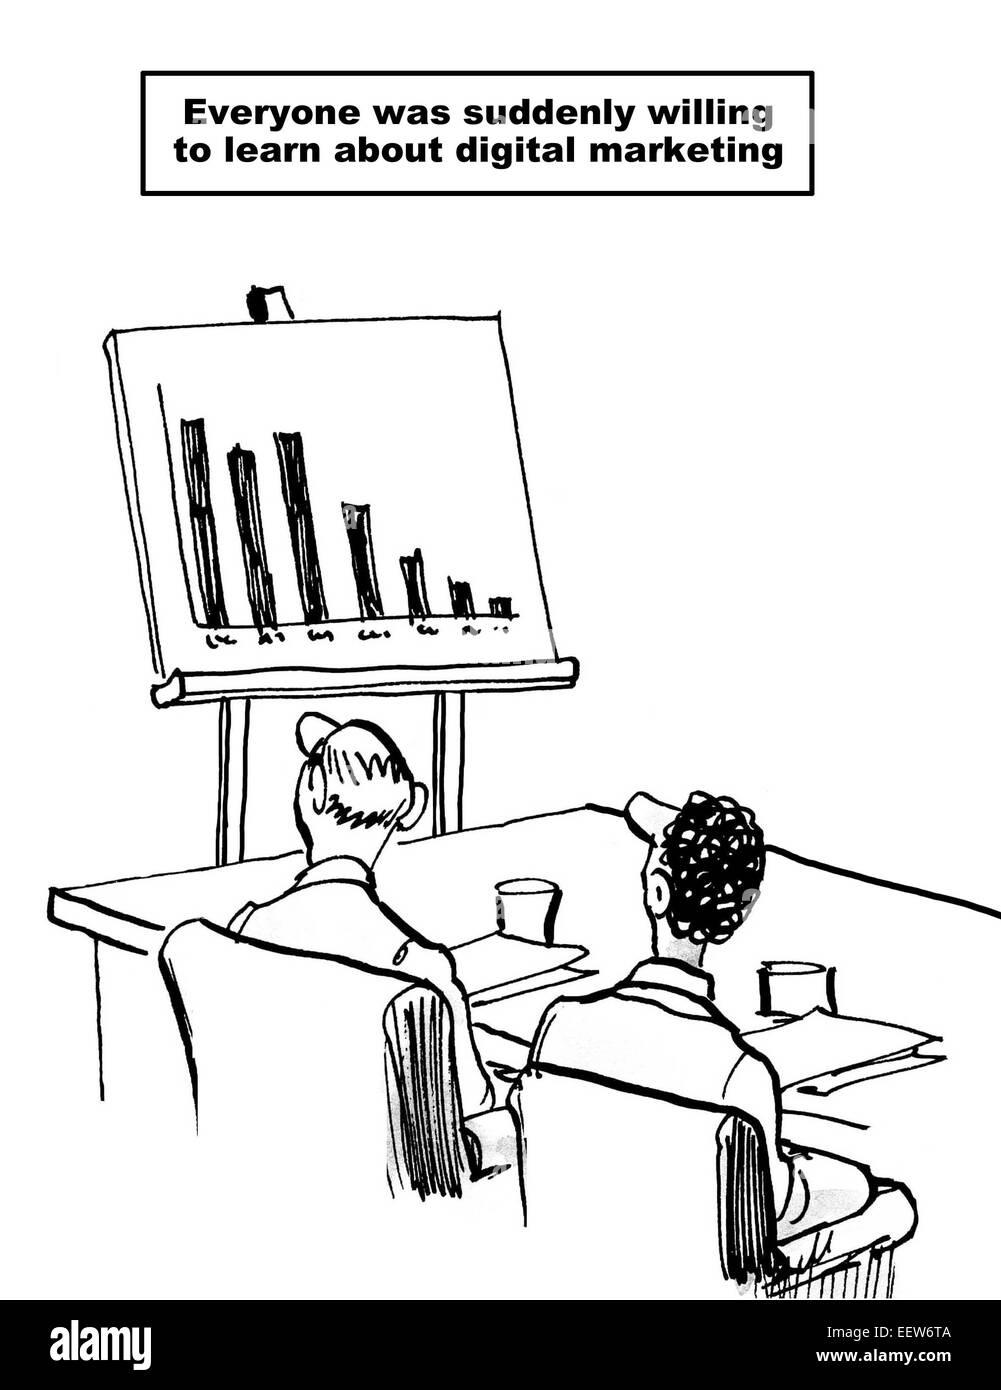 Cartoon of a business meeting and chart showing declining sales and states 'everyone was suddenly... learn digital media'. Stock Photo